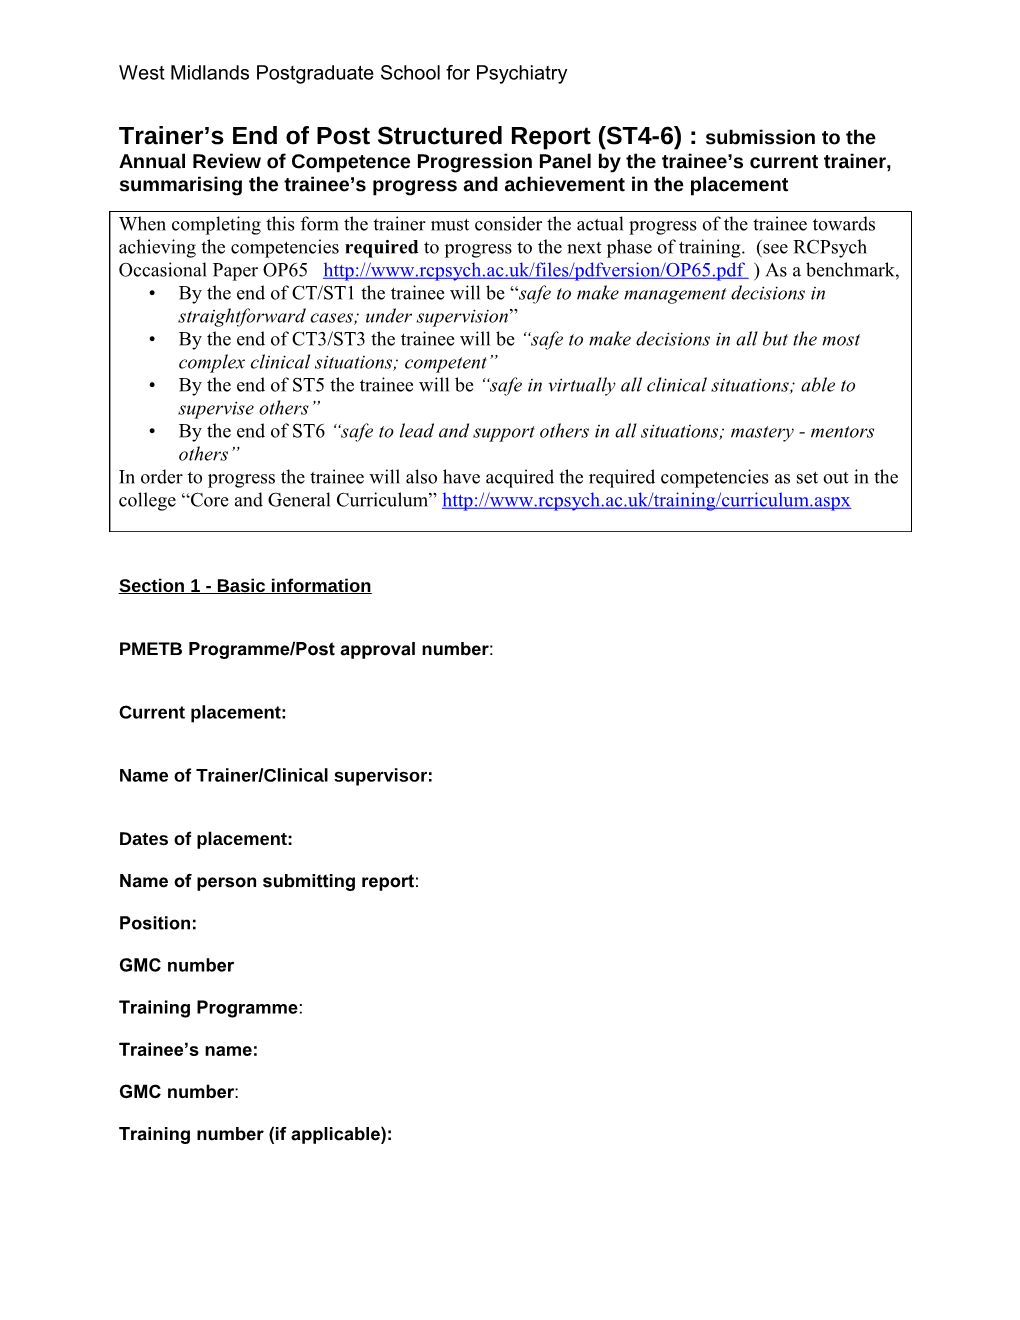 Trainer S Structured Report (CT 1-3) : Submission to the Annual Review of Competence Progression